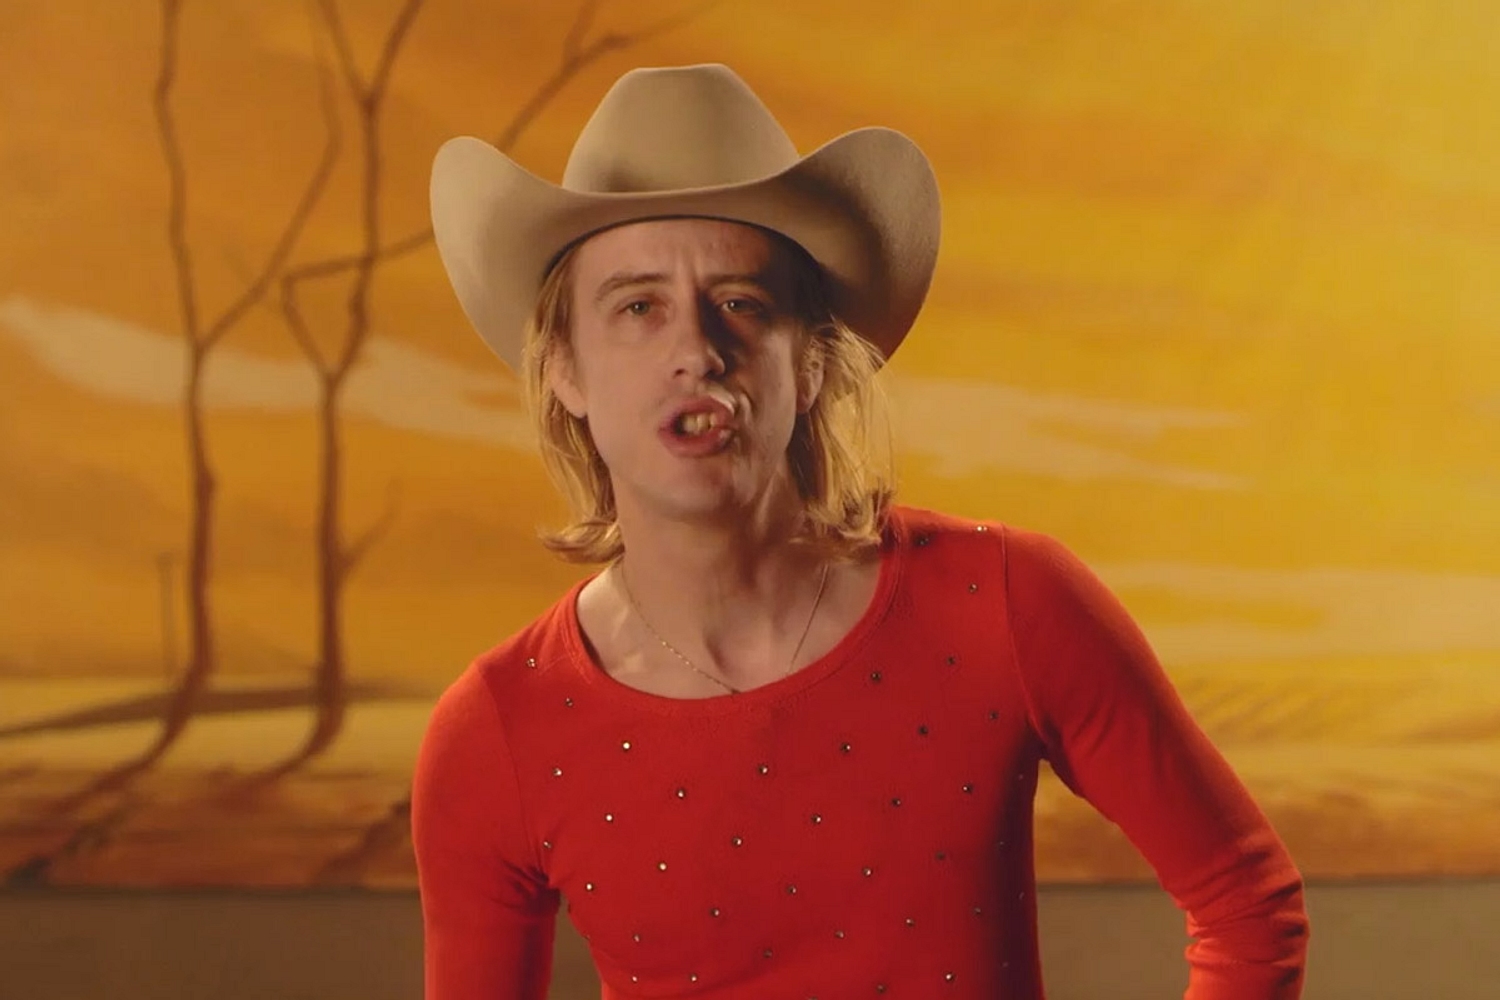 Christopher Owens airs new ‘Never Wanna See That Look Again’ video